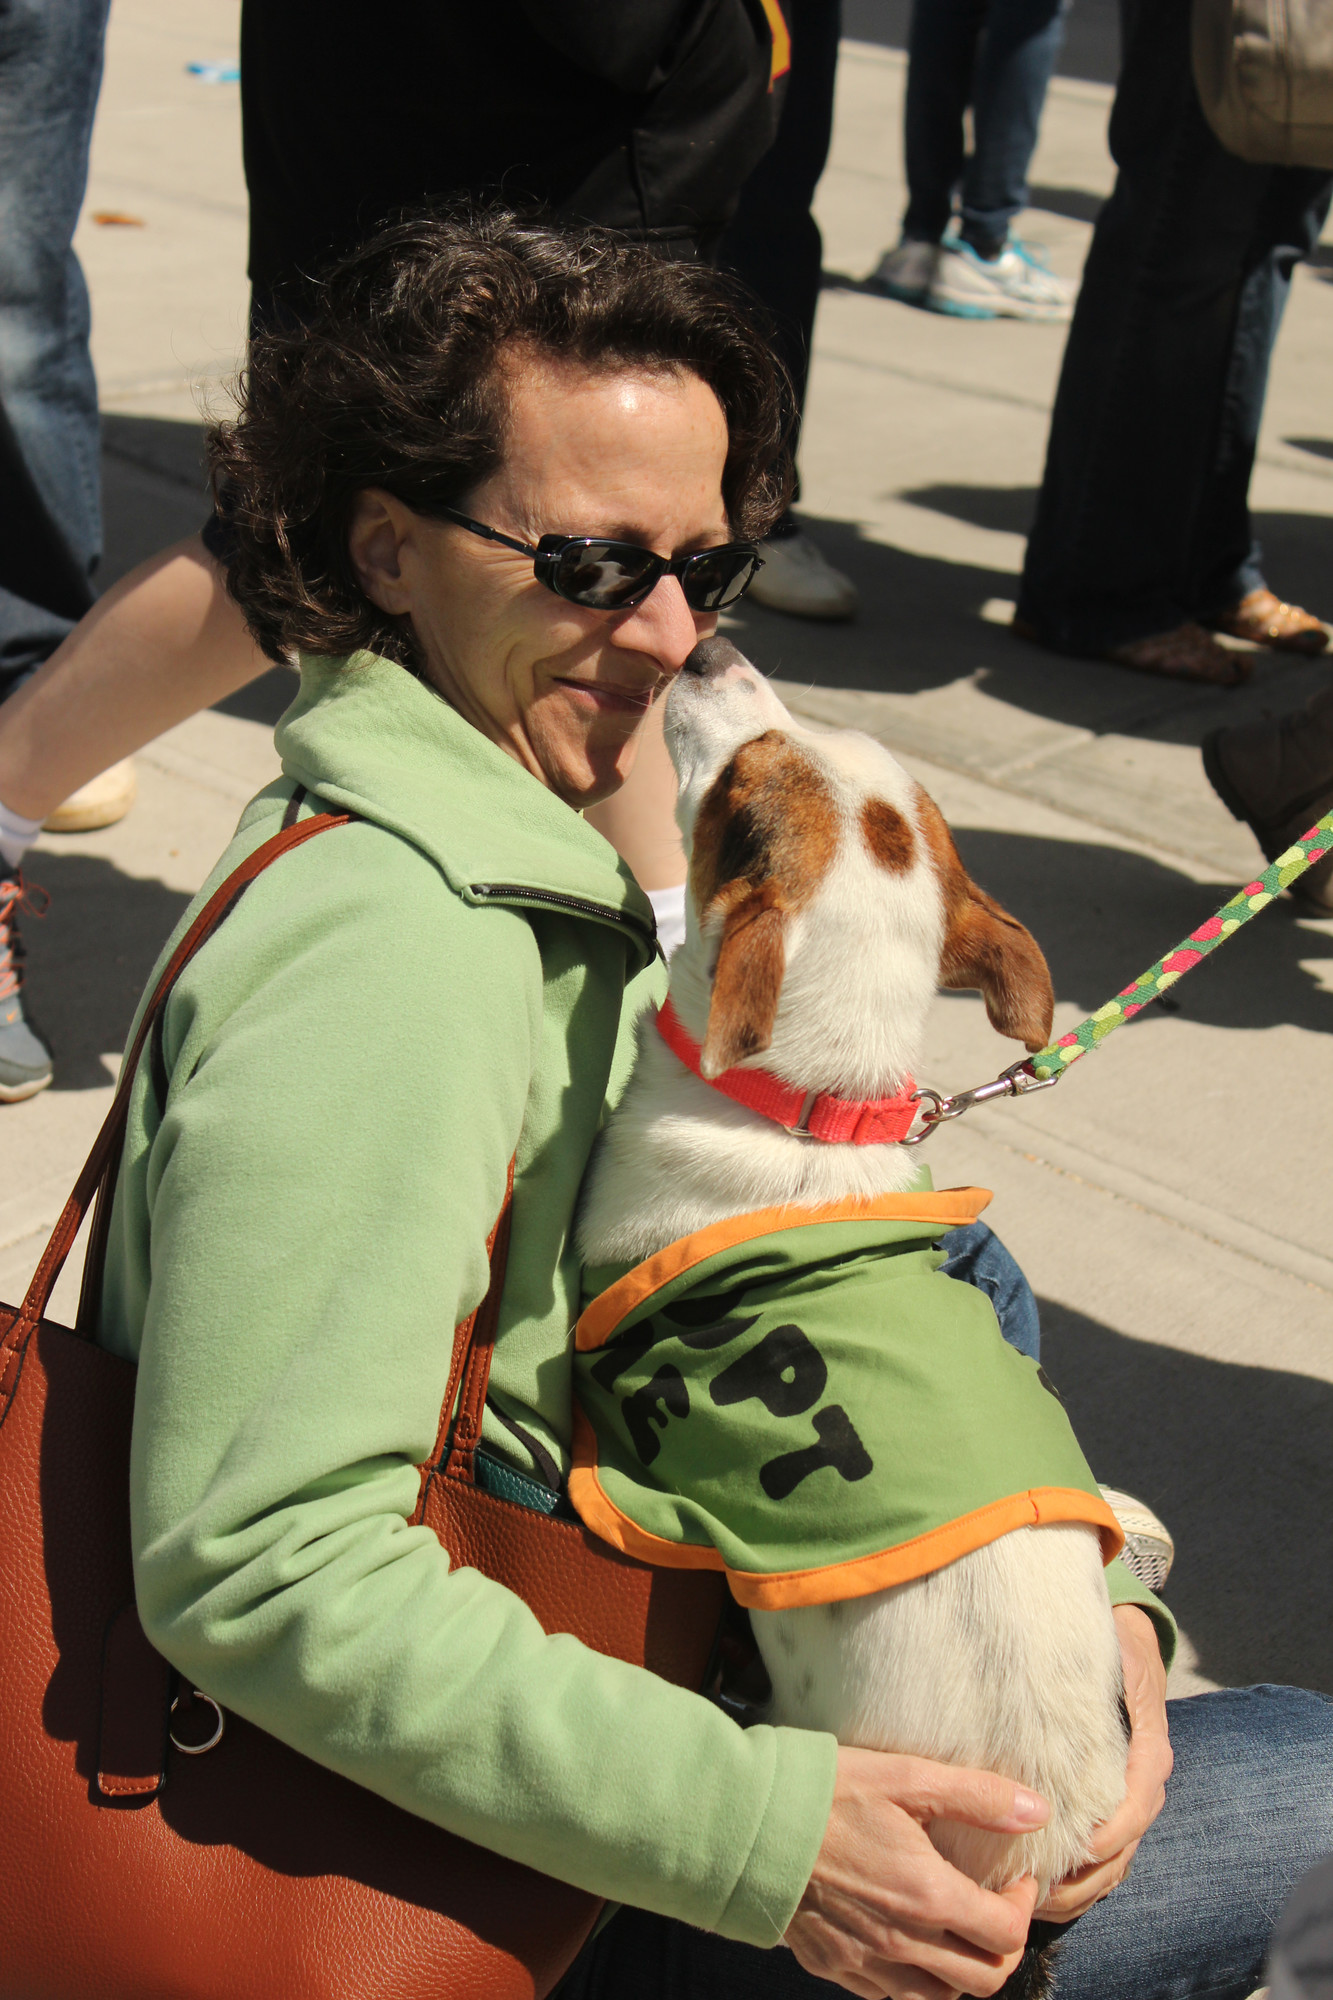 Temple member Leslie Eisenberg of Oceanside got a warm greeting from one of the rescue dogs up for adoption.